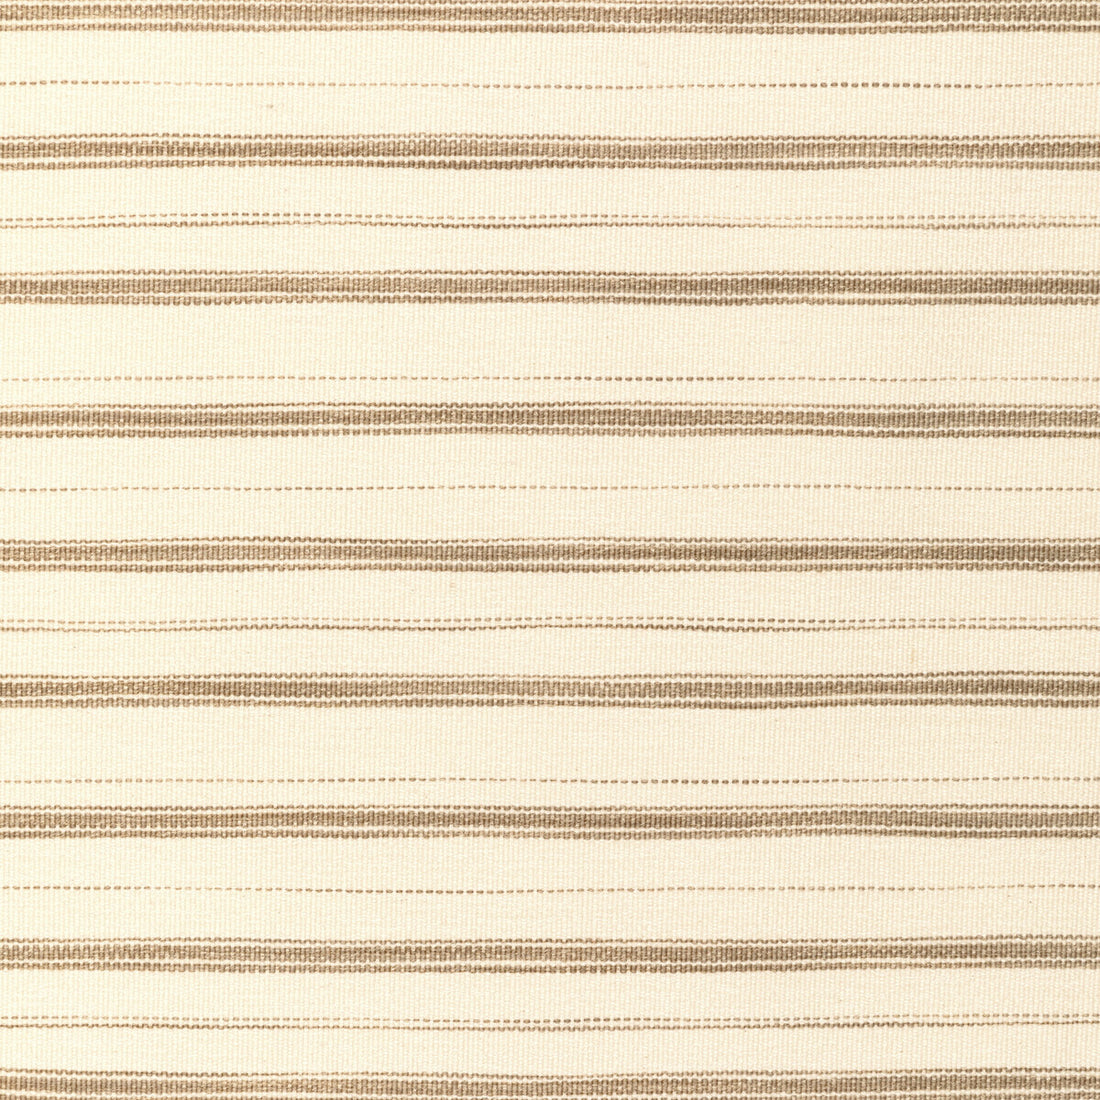 Meeker Stripe fabric in flax color - pattern 2020209.16.0 - by Lee Jofa in the Breckenridge collection